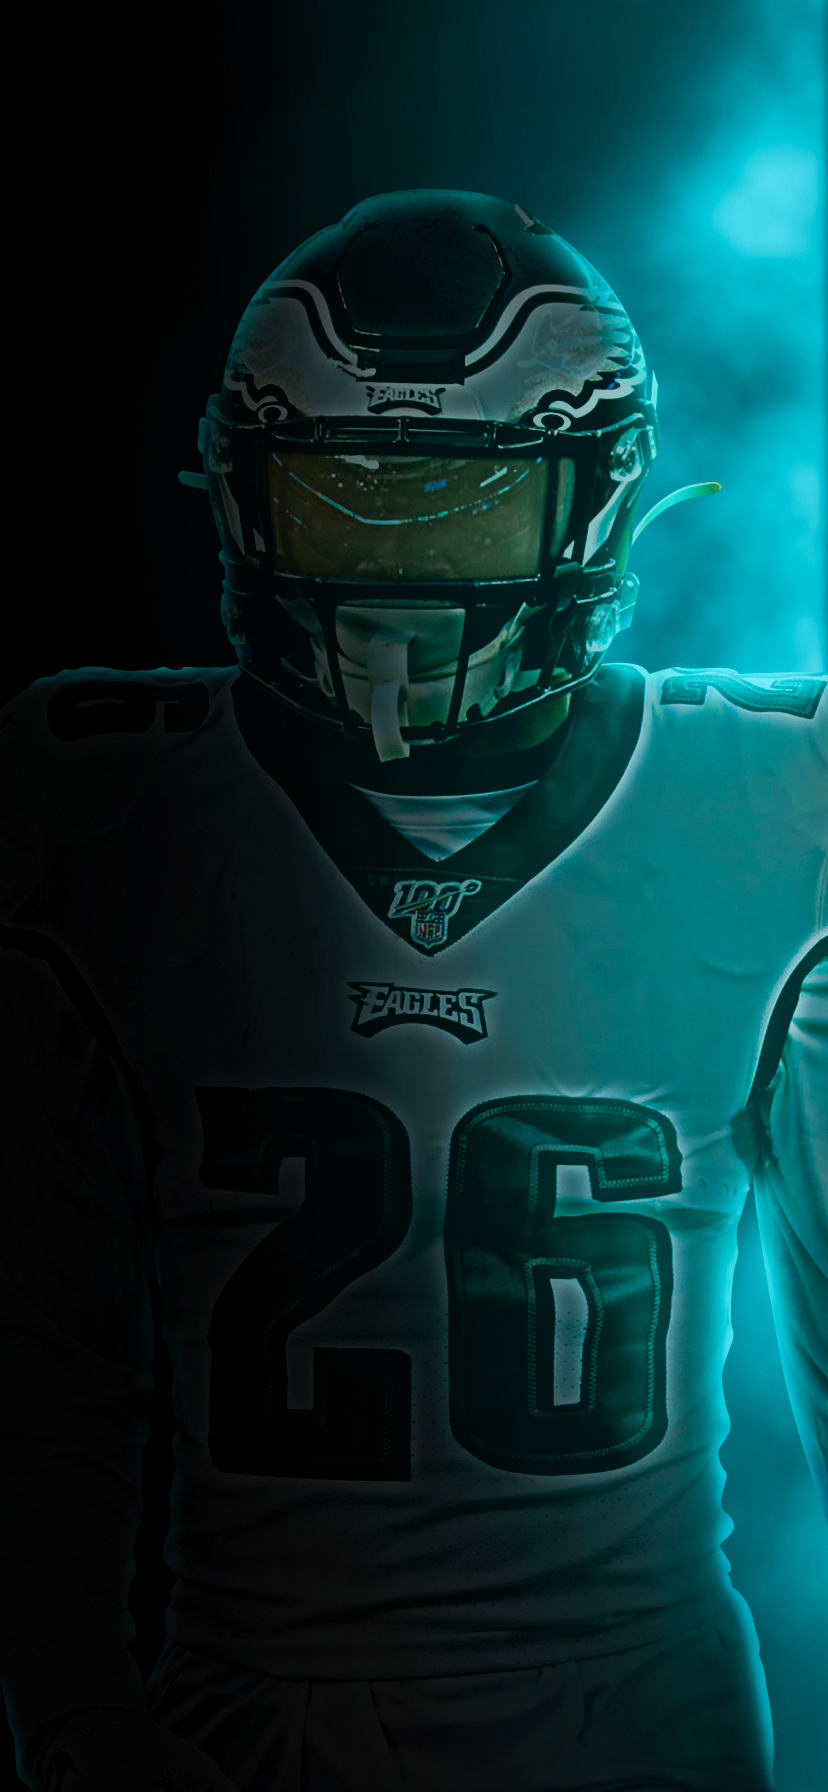 Share Your Eagles Wallpaper For Mobile Devices Here And Feel